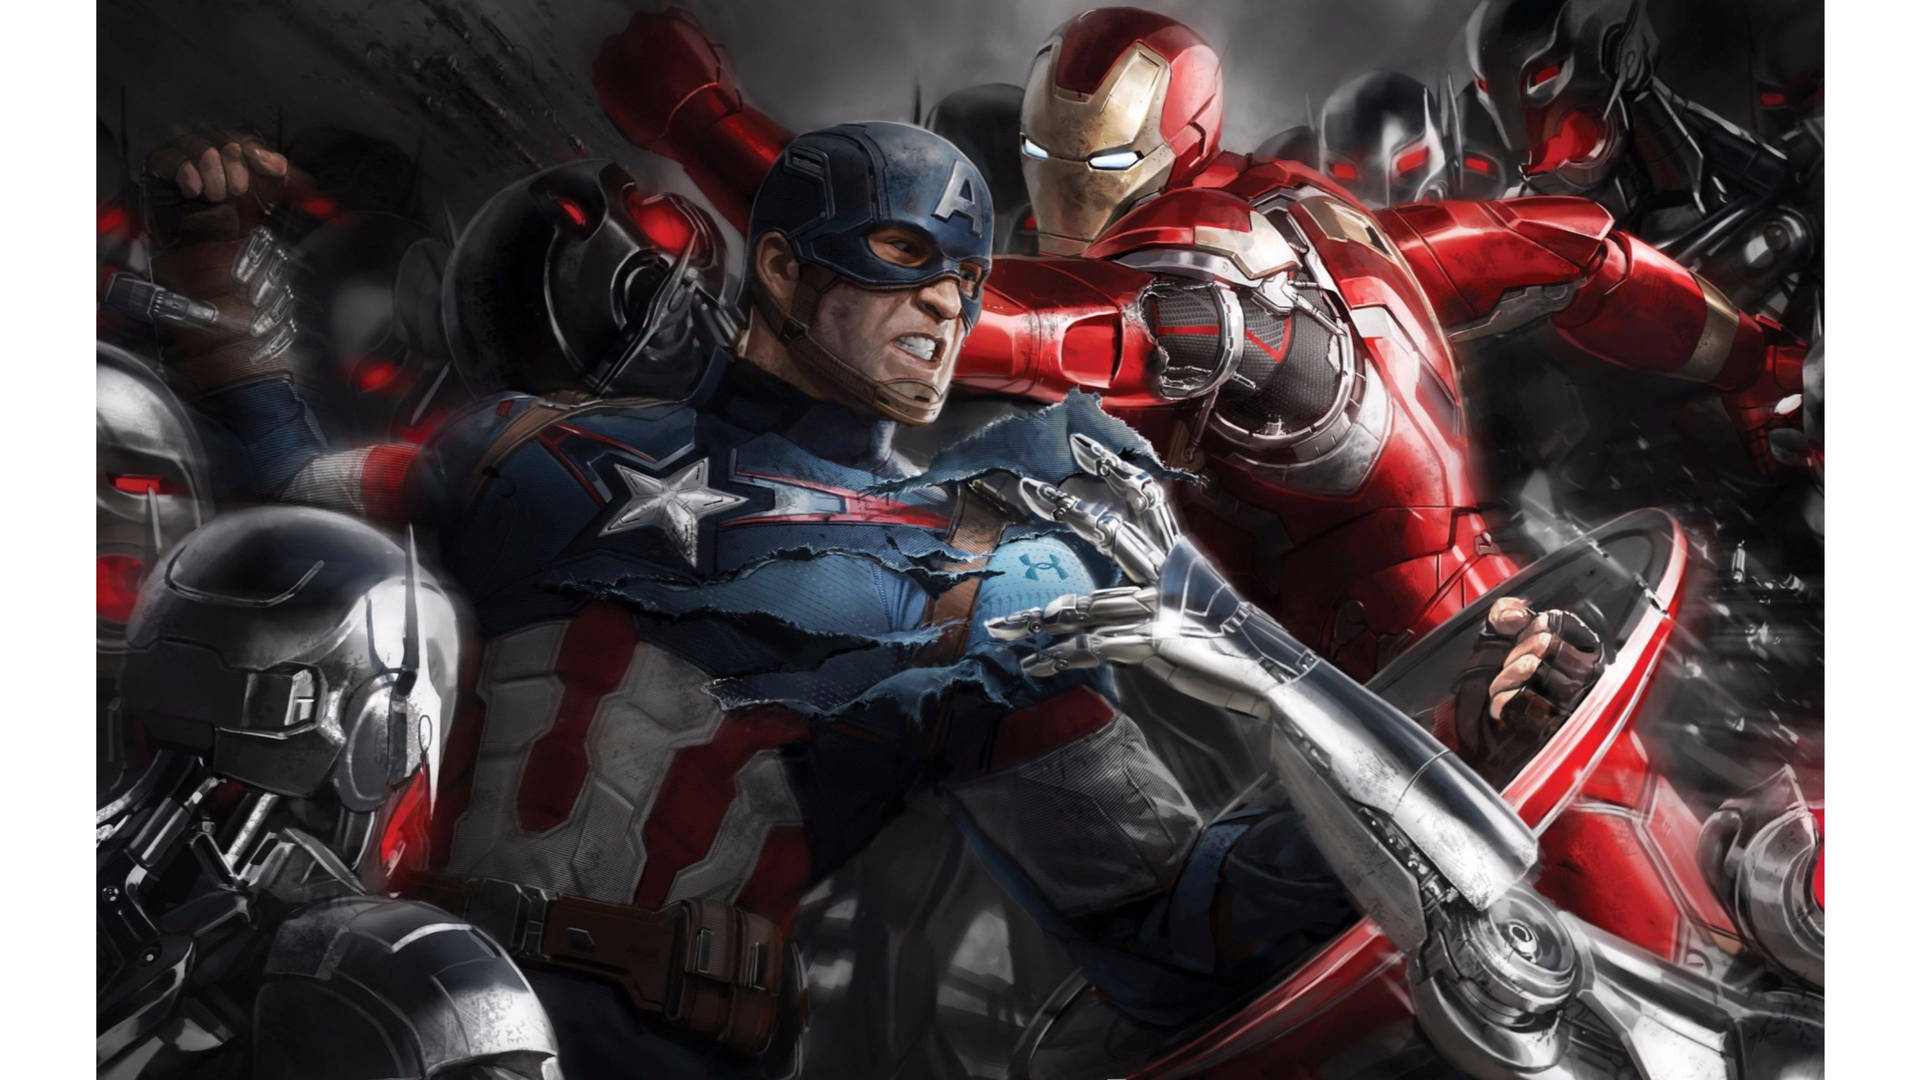 Captain America, Iron Man, and Ultron Stand Ready for Battle Wallpaper